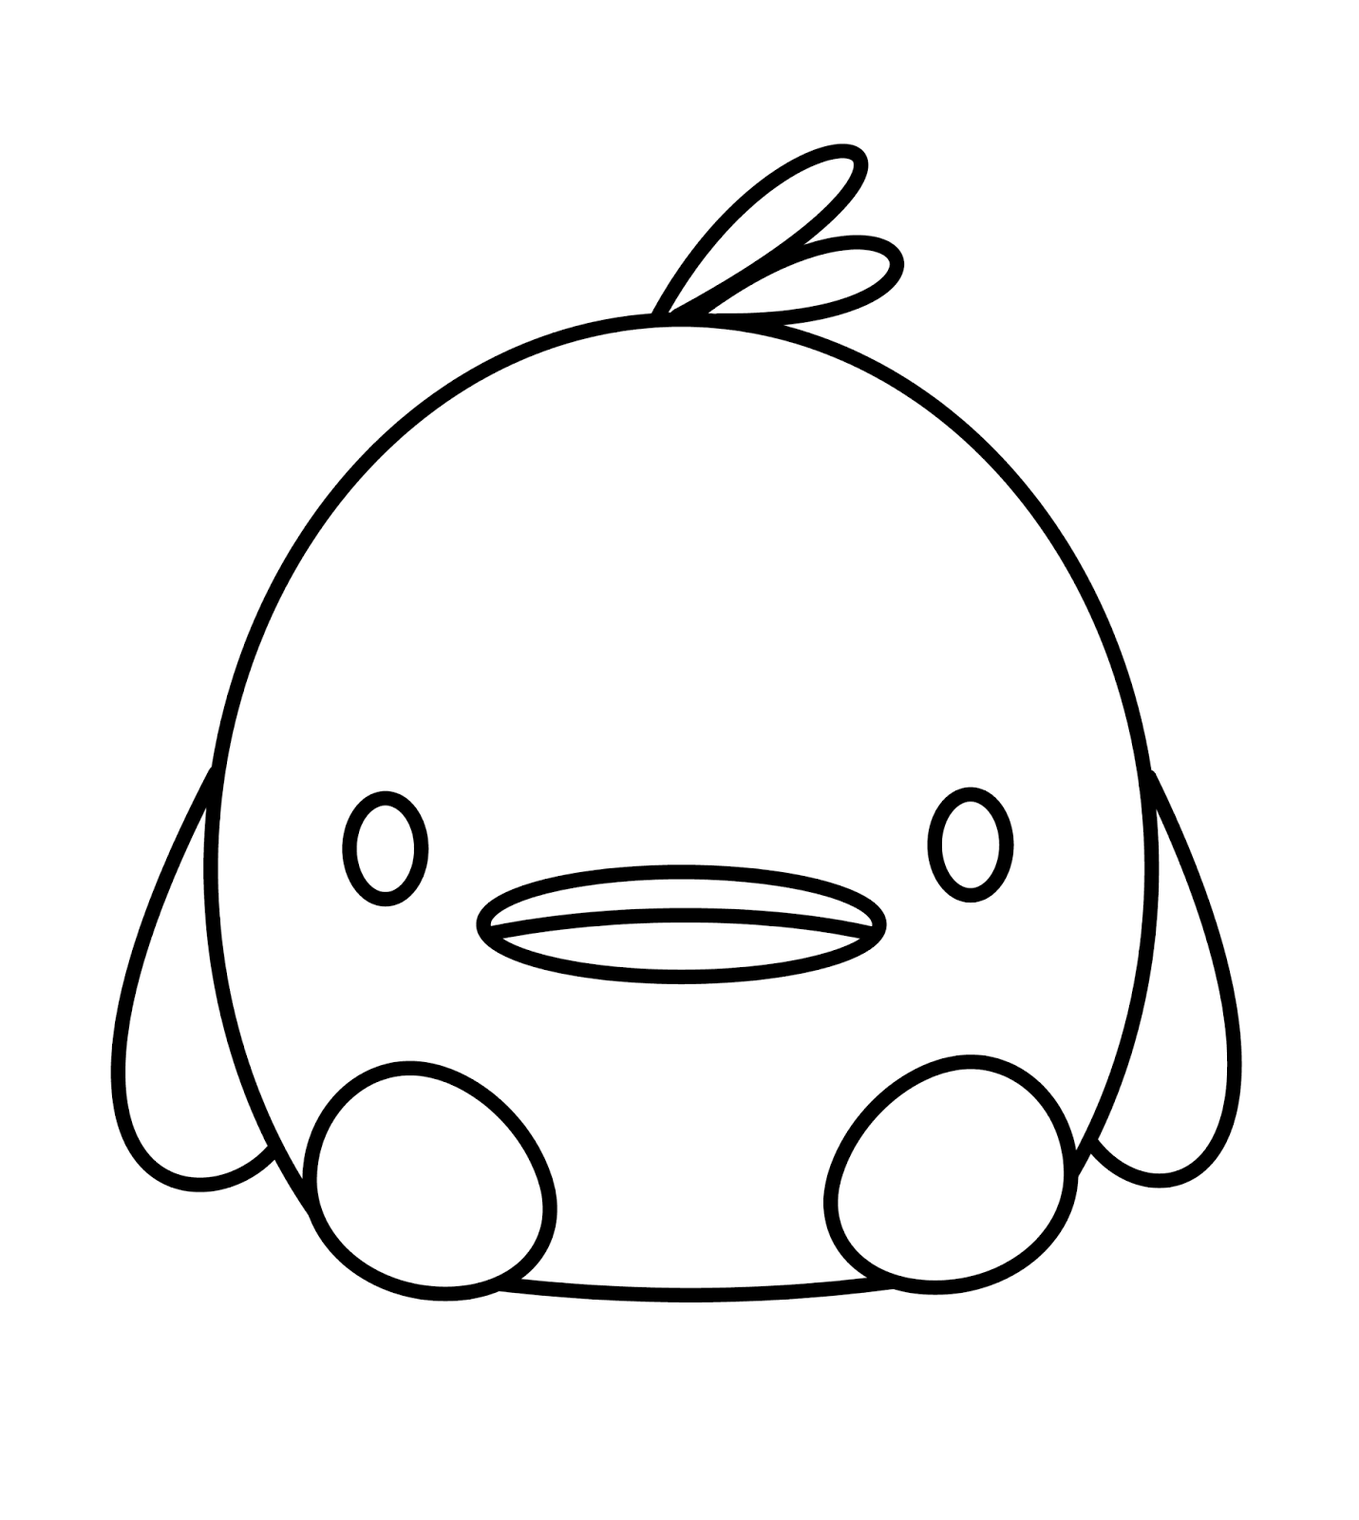 Duck Line Drawing Clipart - Free to use Clip Art Resource